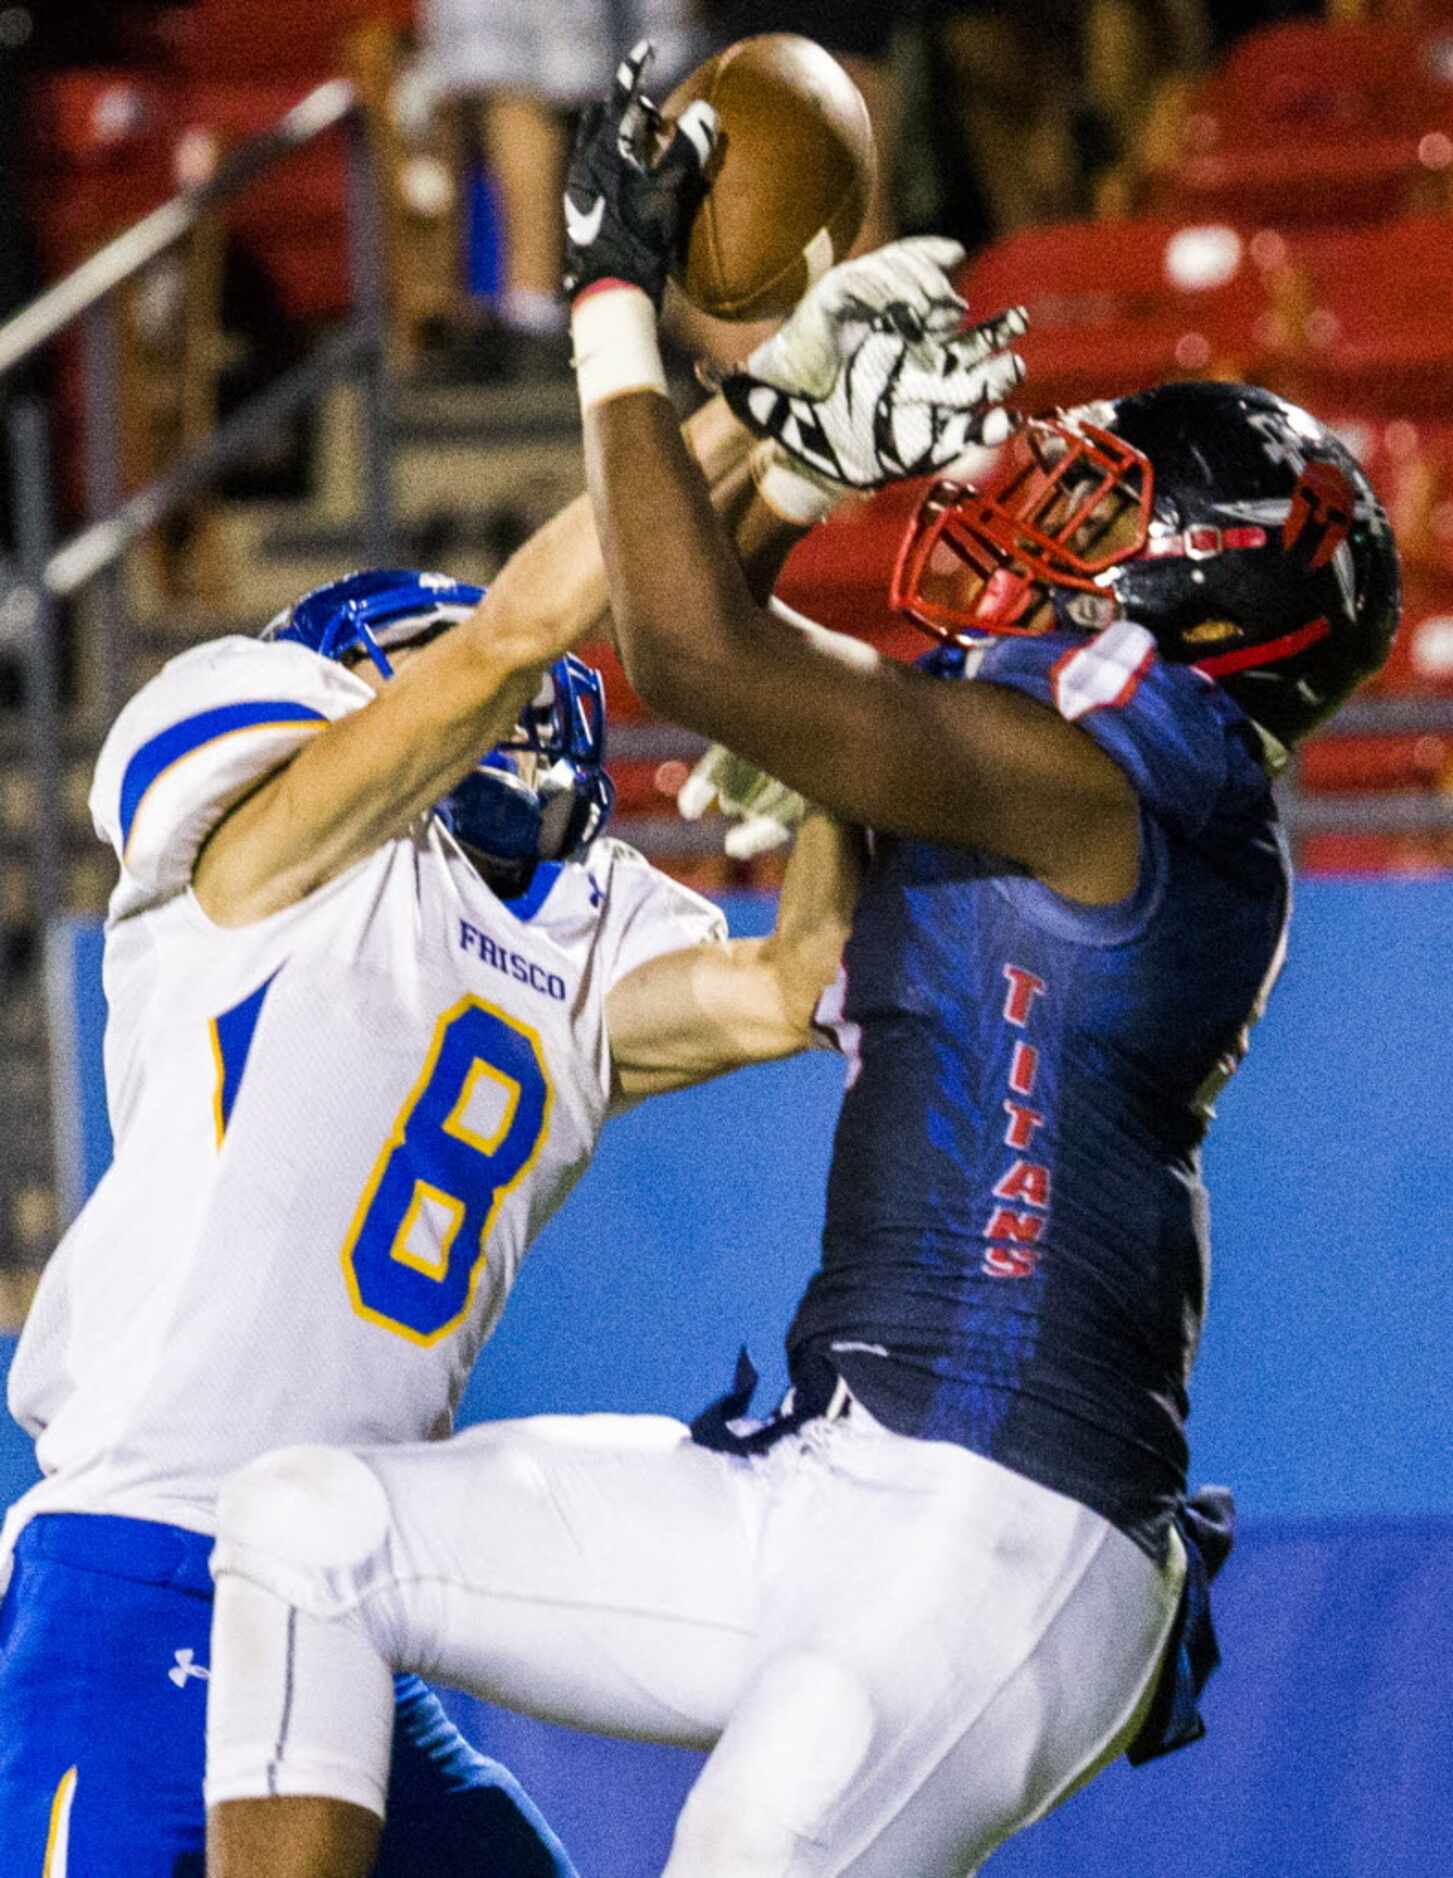 Frisco Centennial wide receiver Kenny Nelson (5) catches a pass in the end zone for a...